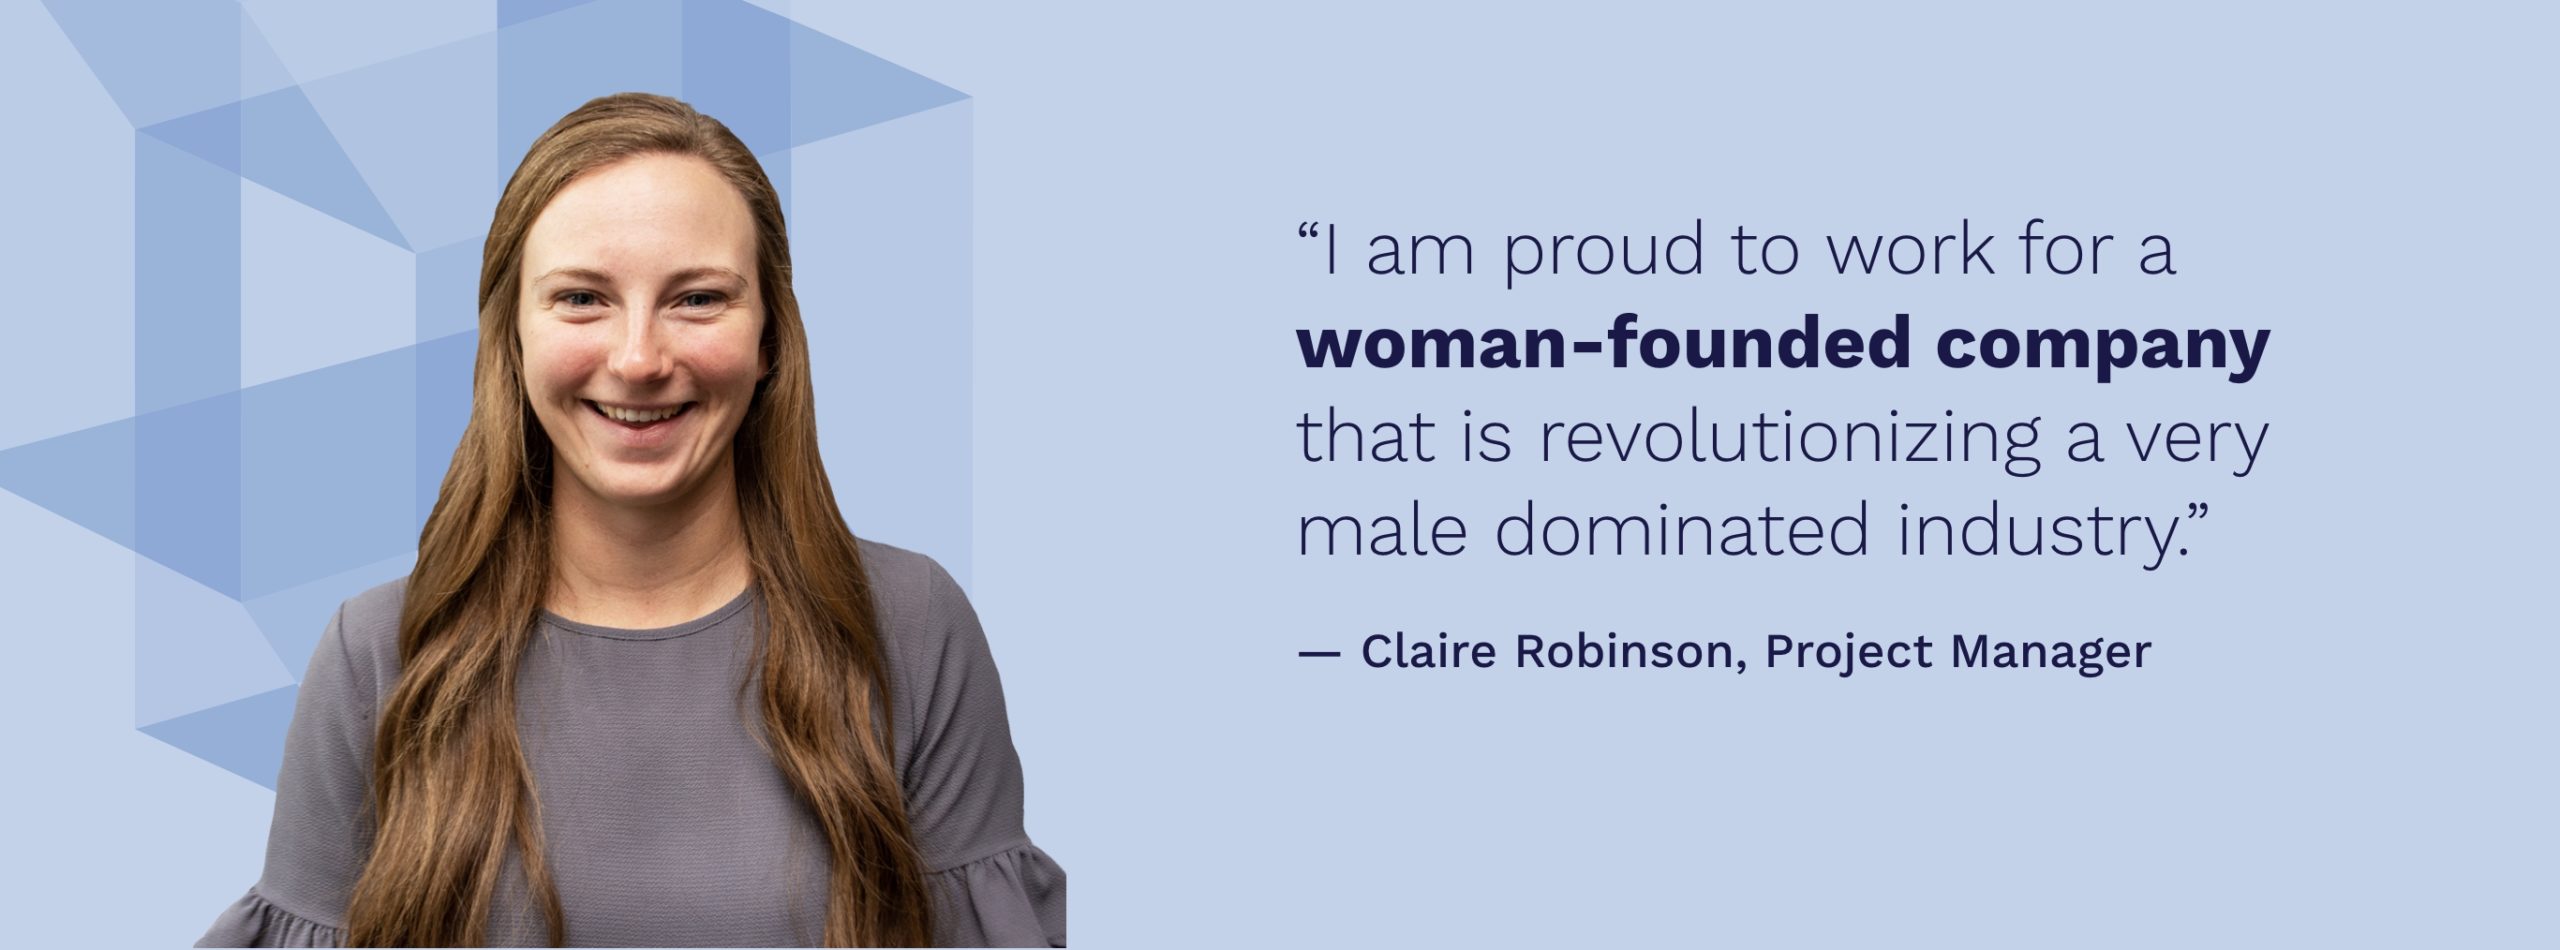 claire-robinson-quote-with-blue-background